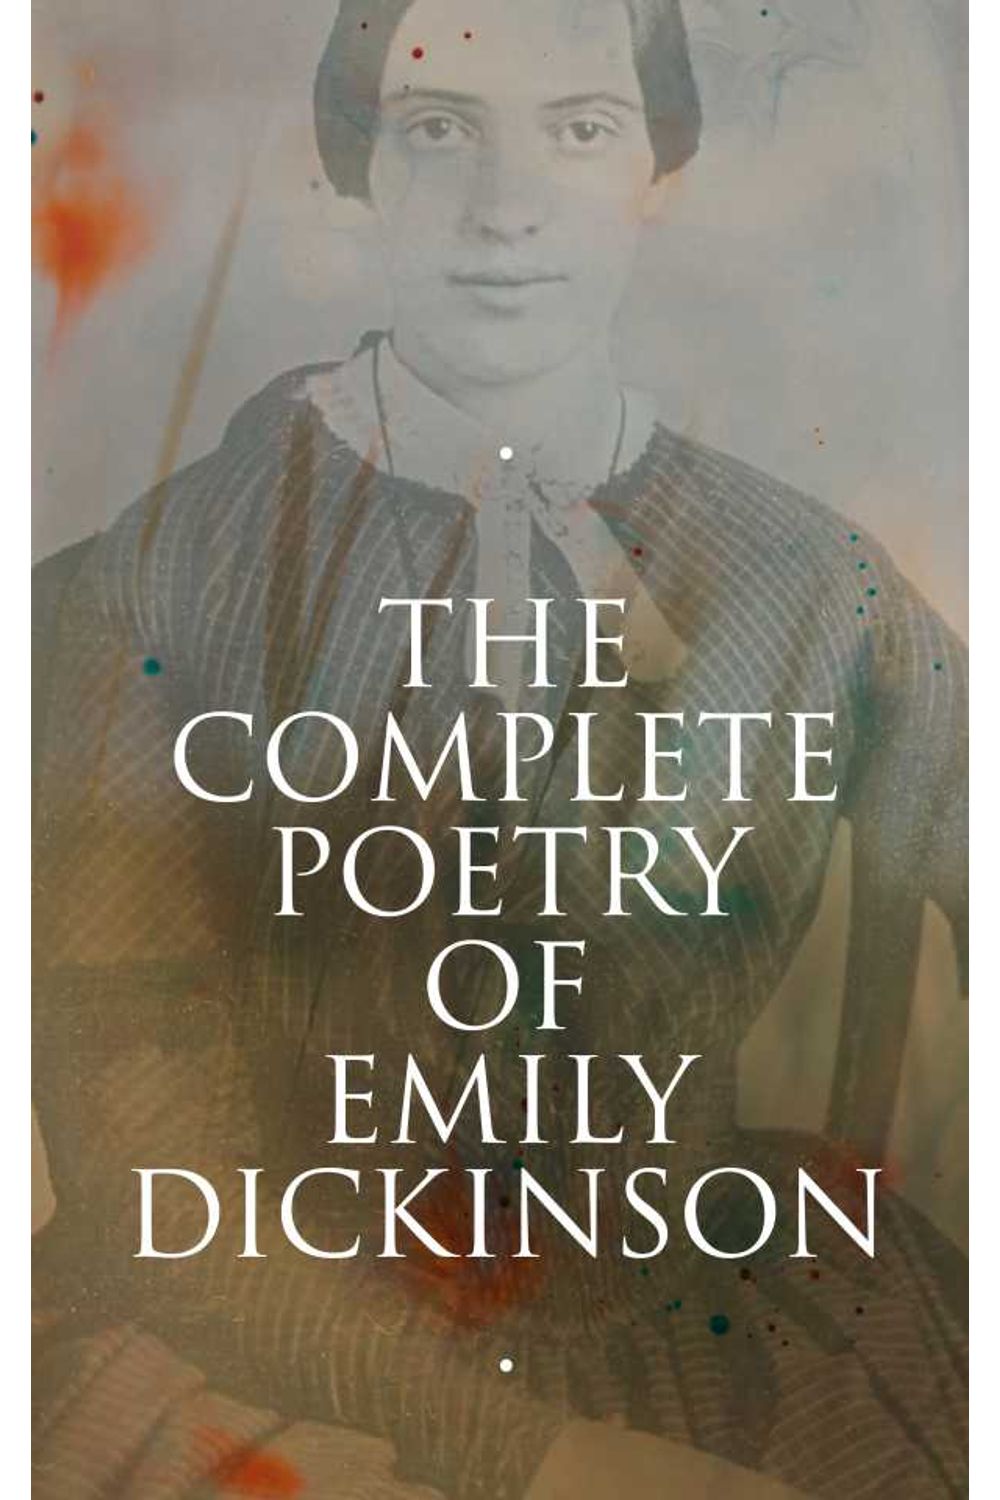 bw-the-complete-poetry-of-emily-dickinson-eartnow-4066338120427